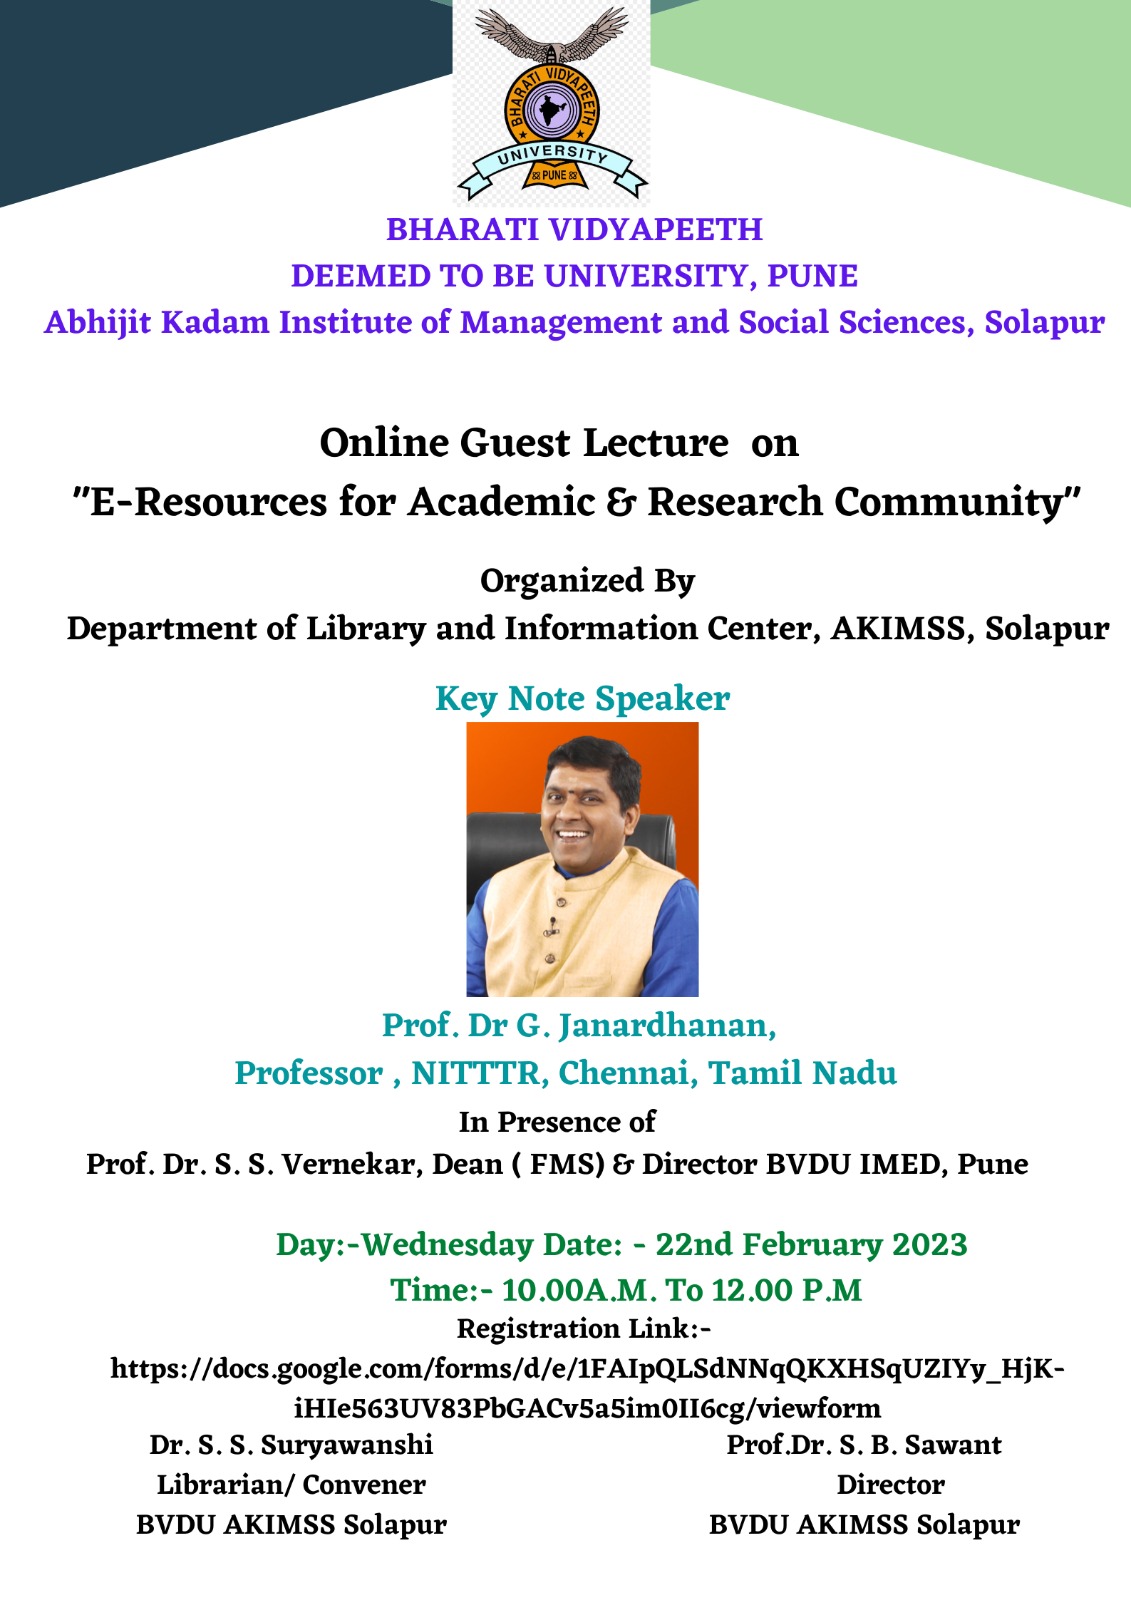 Online Guest Lecture On “ E- Resources for Academic and Research Community